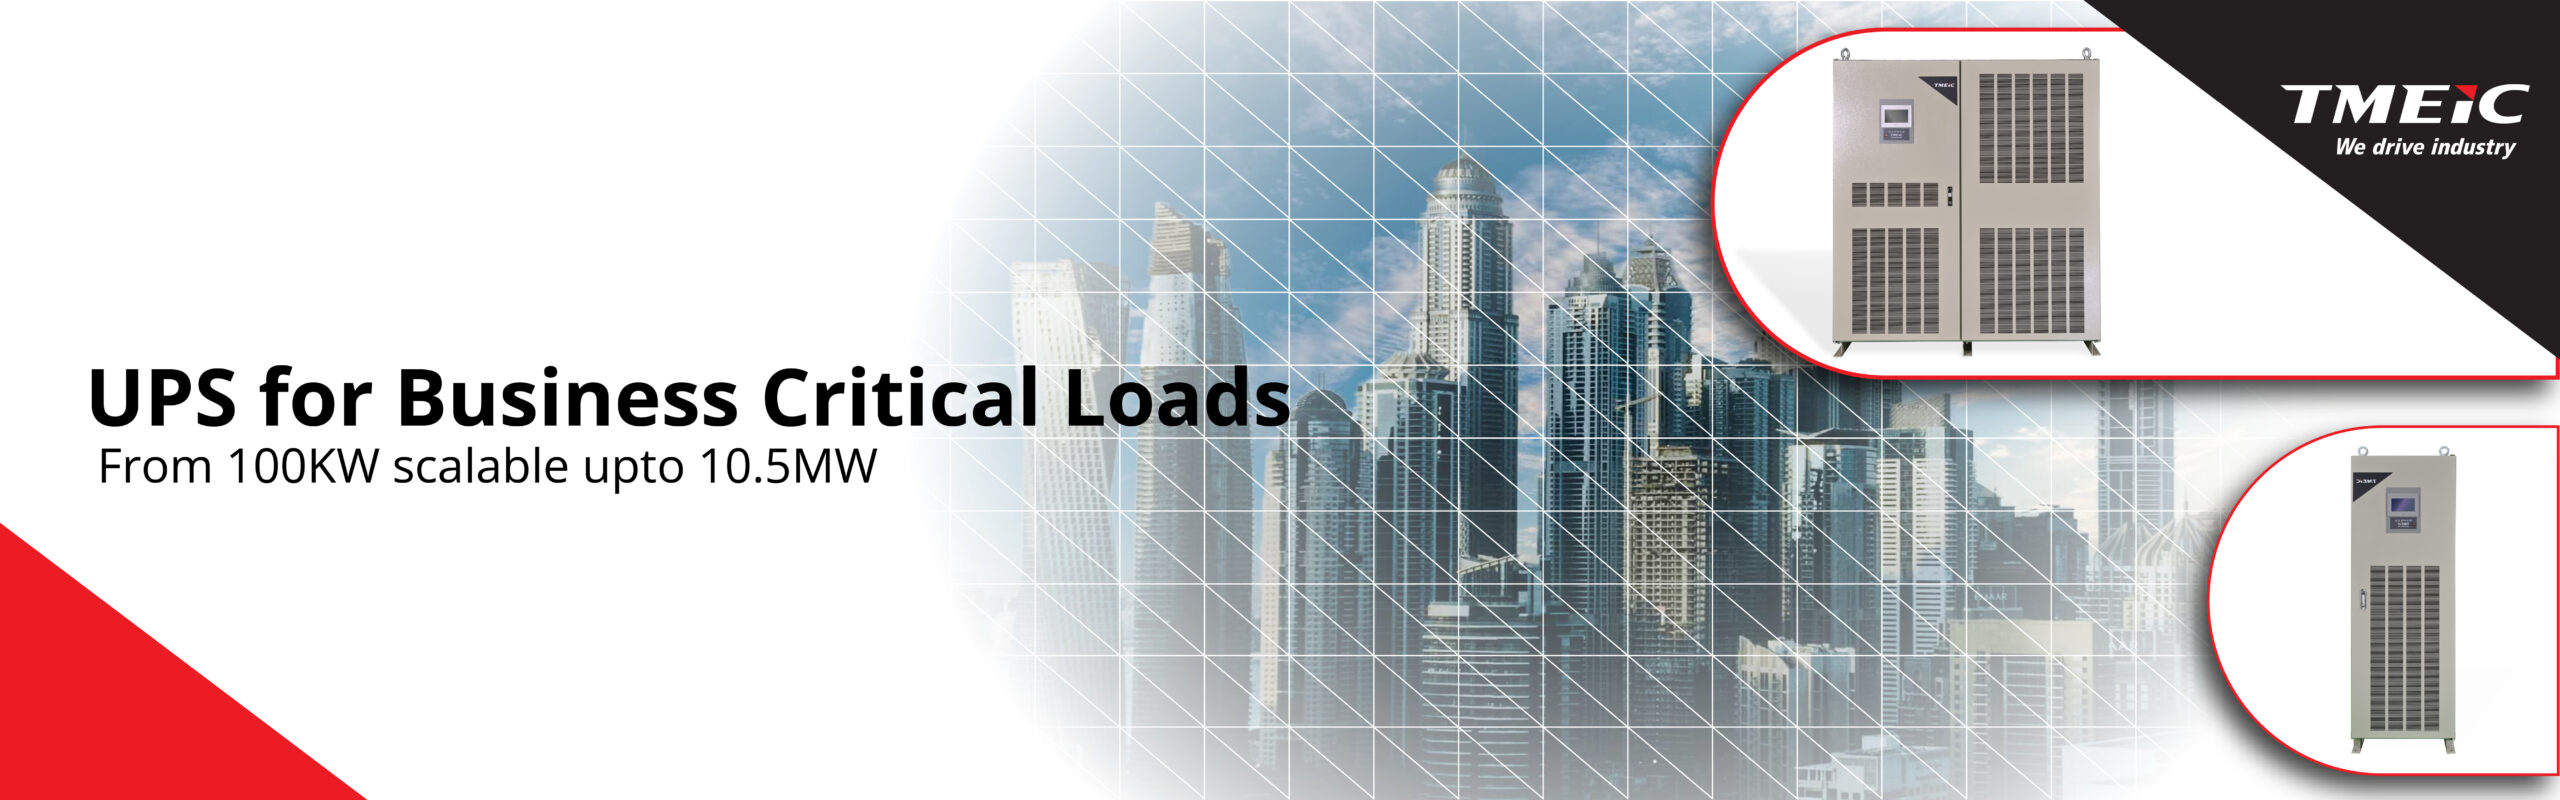 Next Generation UPS for Business Critical Loads